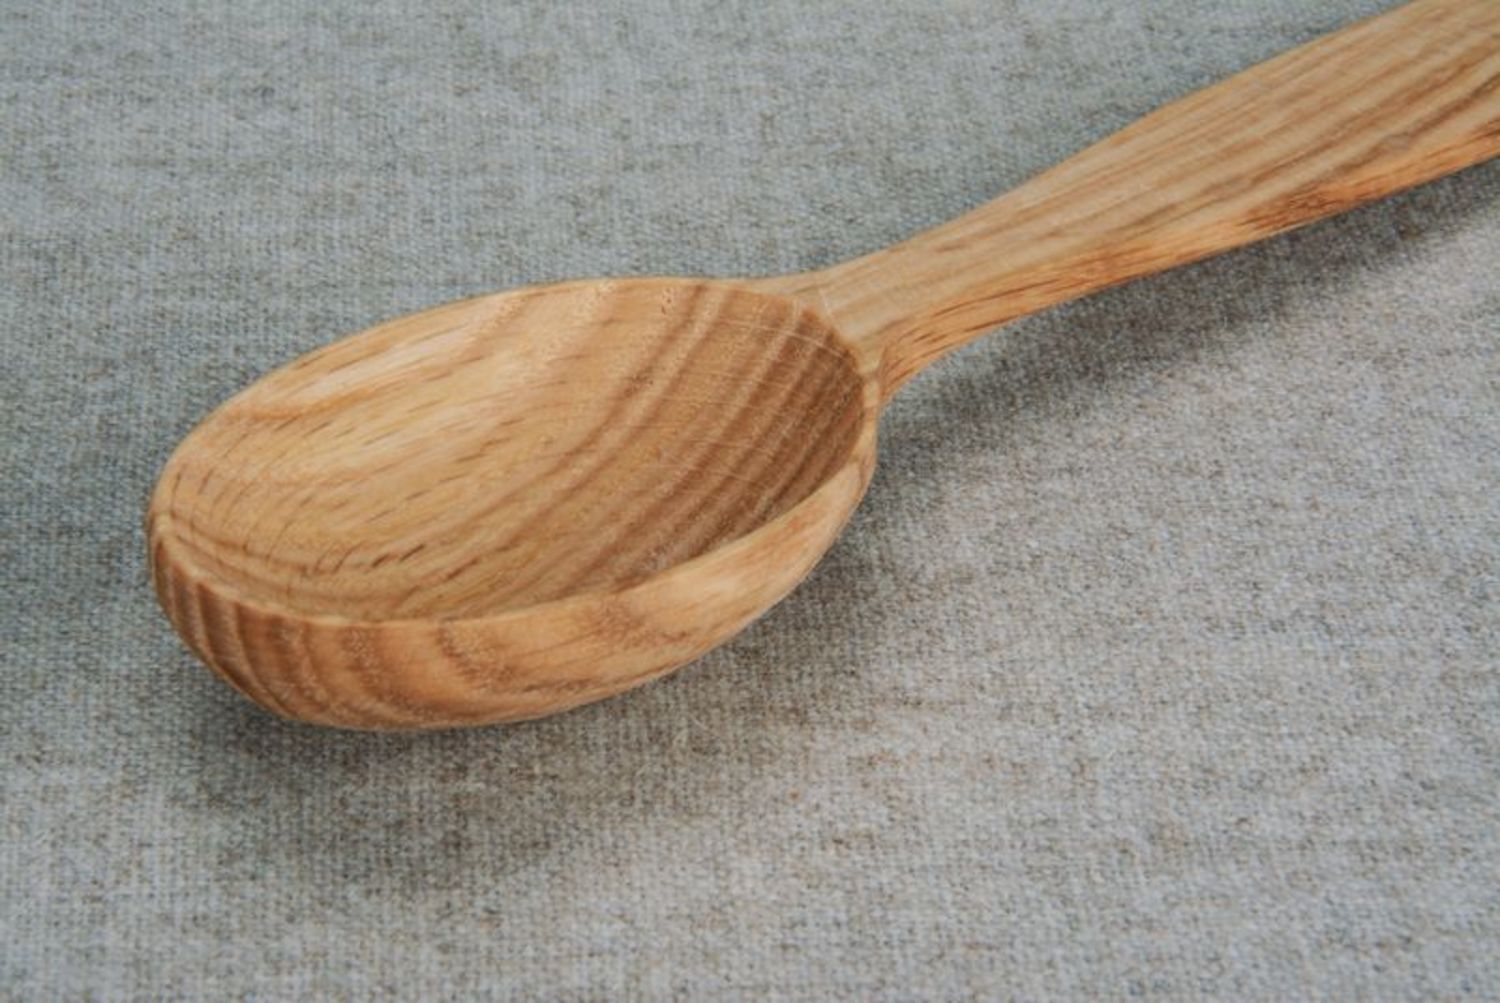 Handmade wooden spoon eco friendly tableware large wooden spoon kitchen decor photo 2